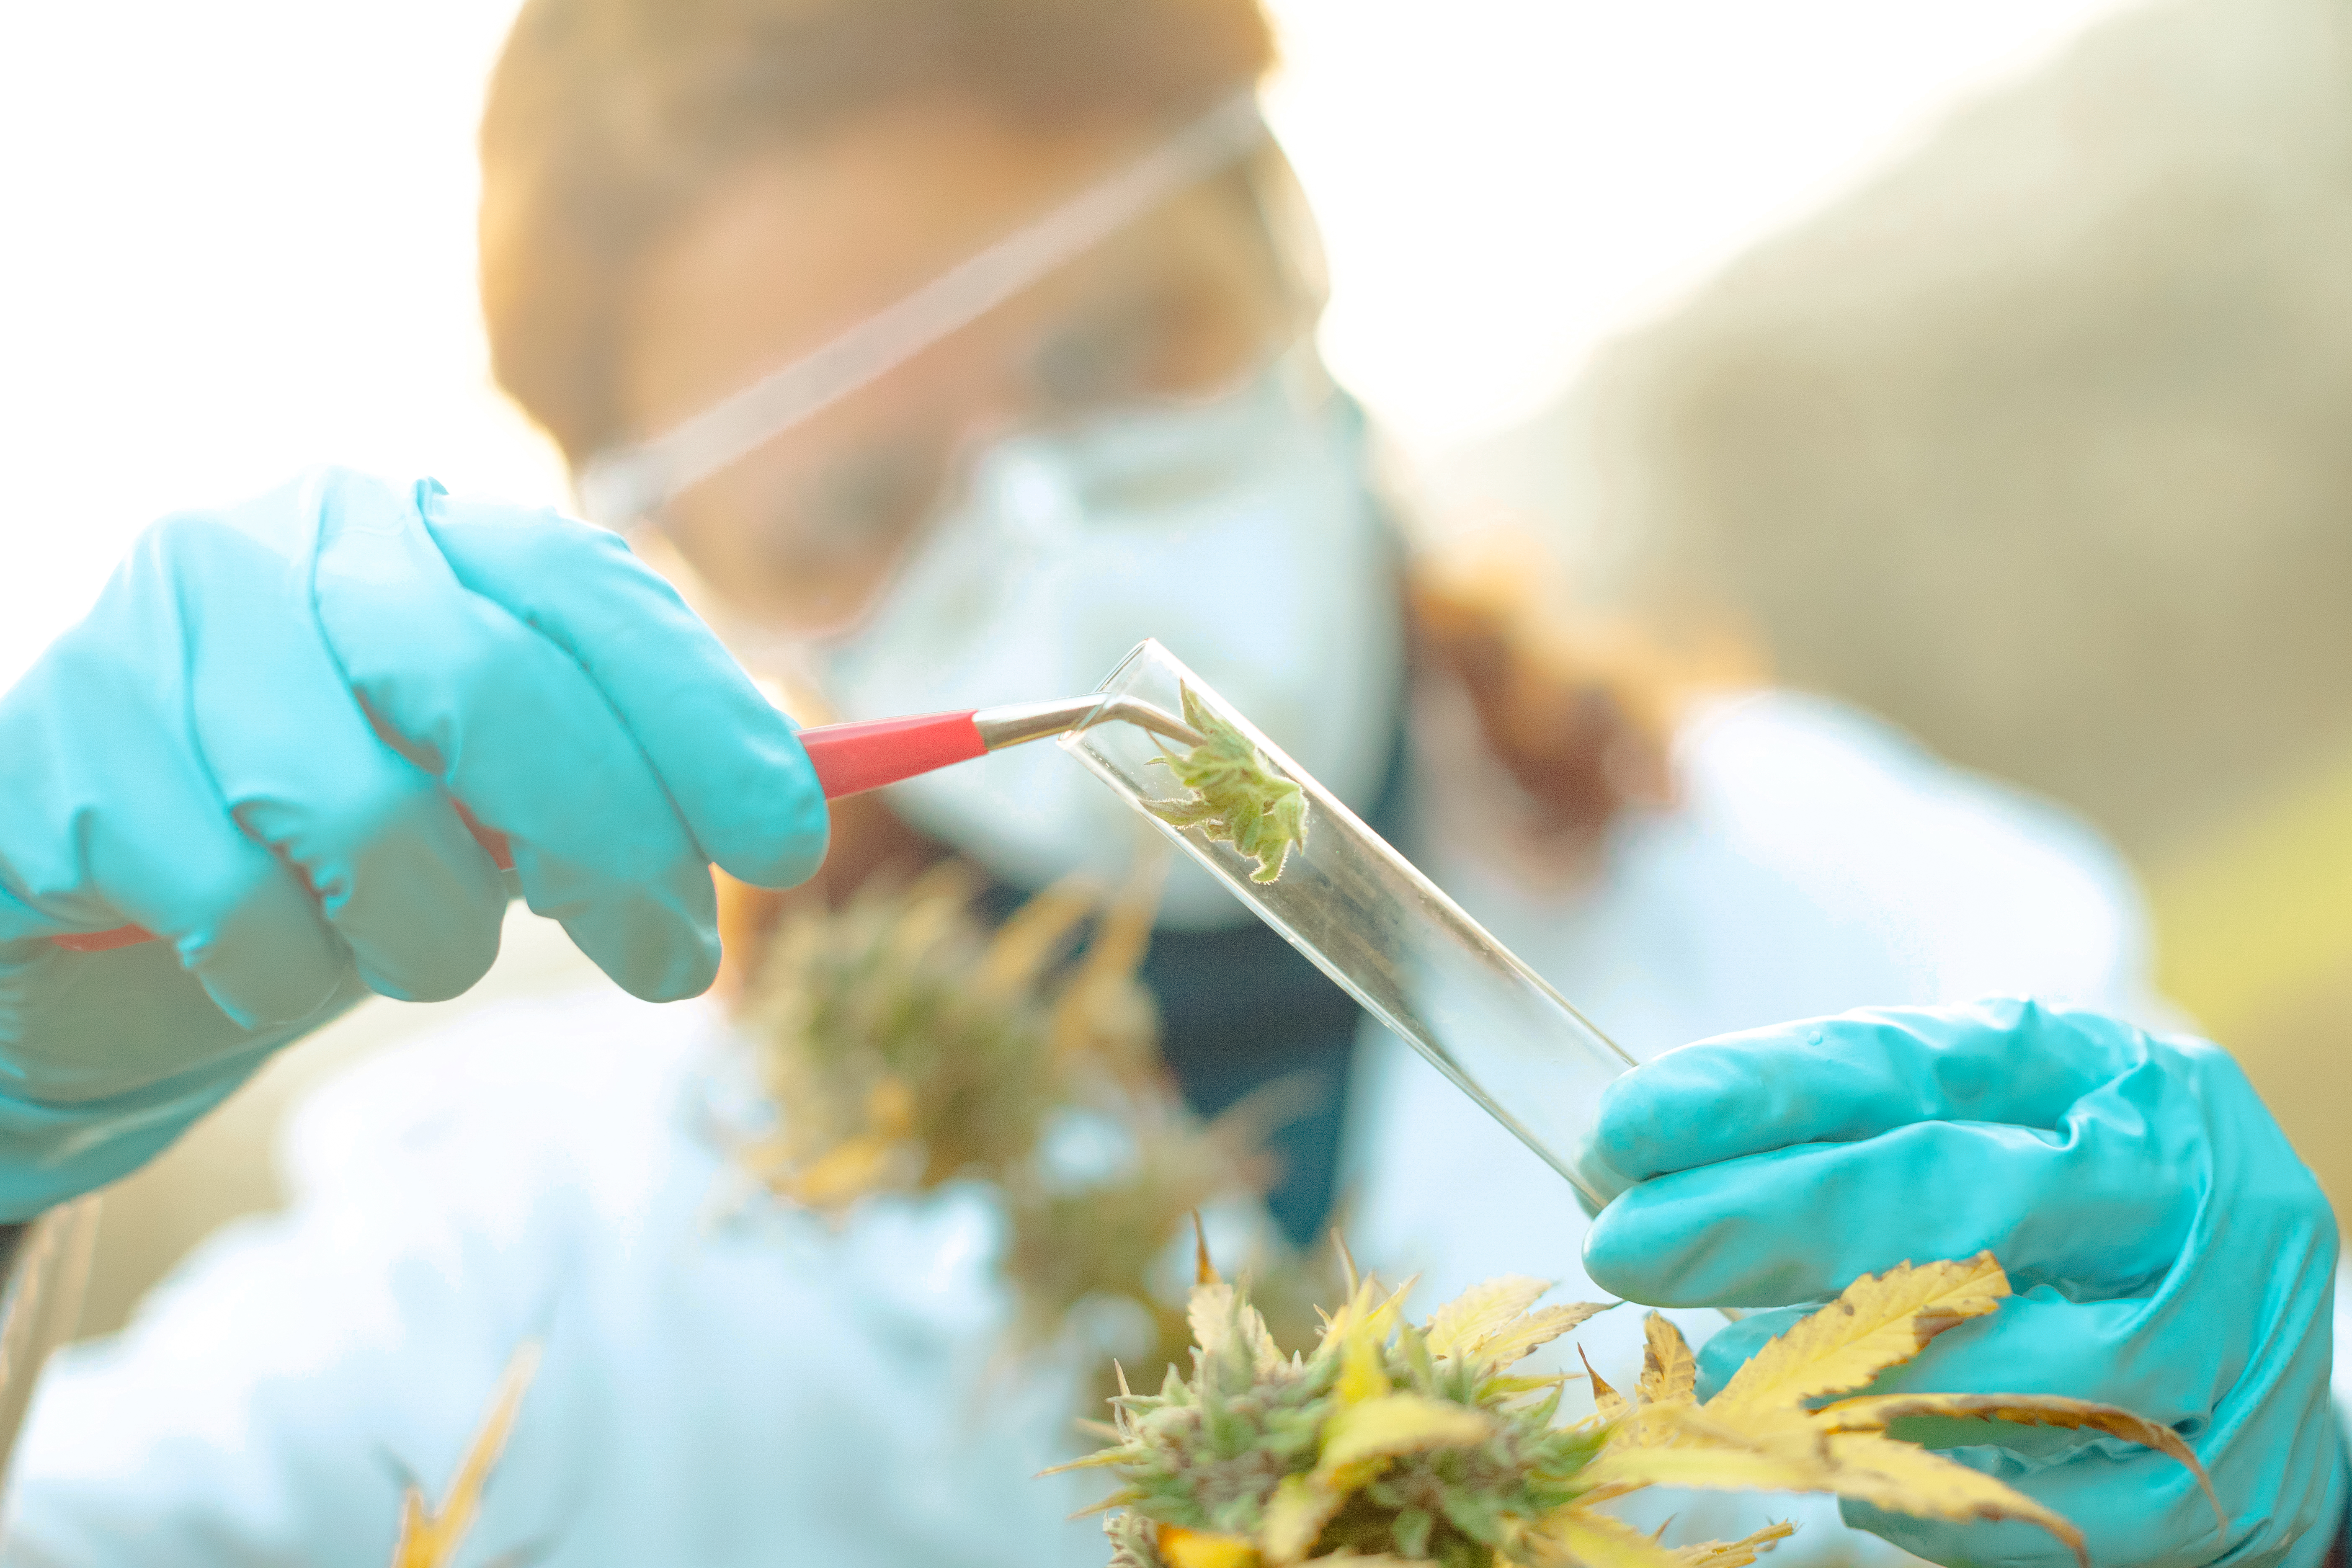 The science behind CBD